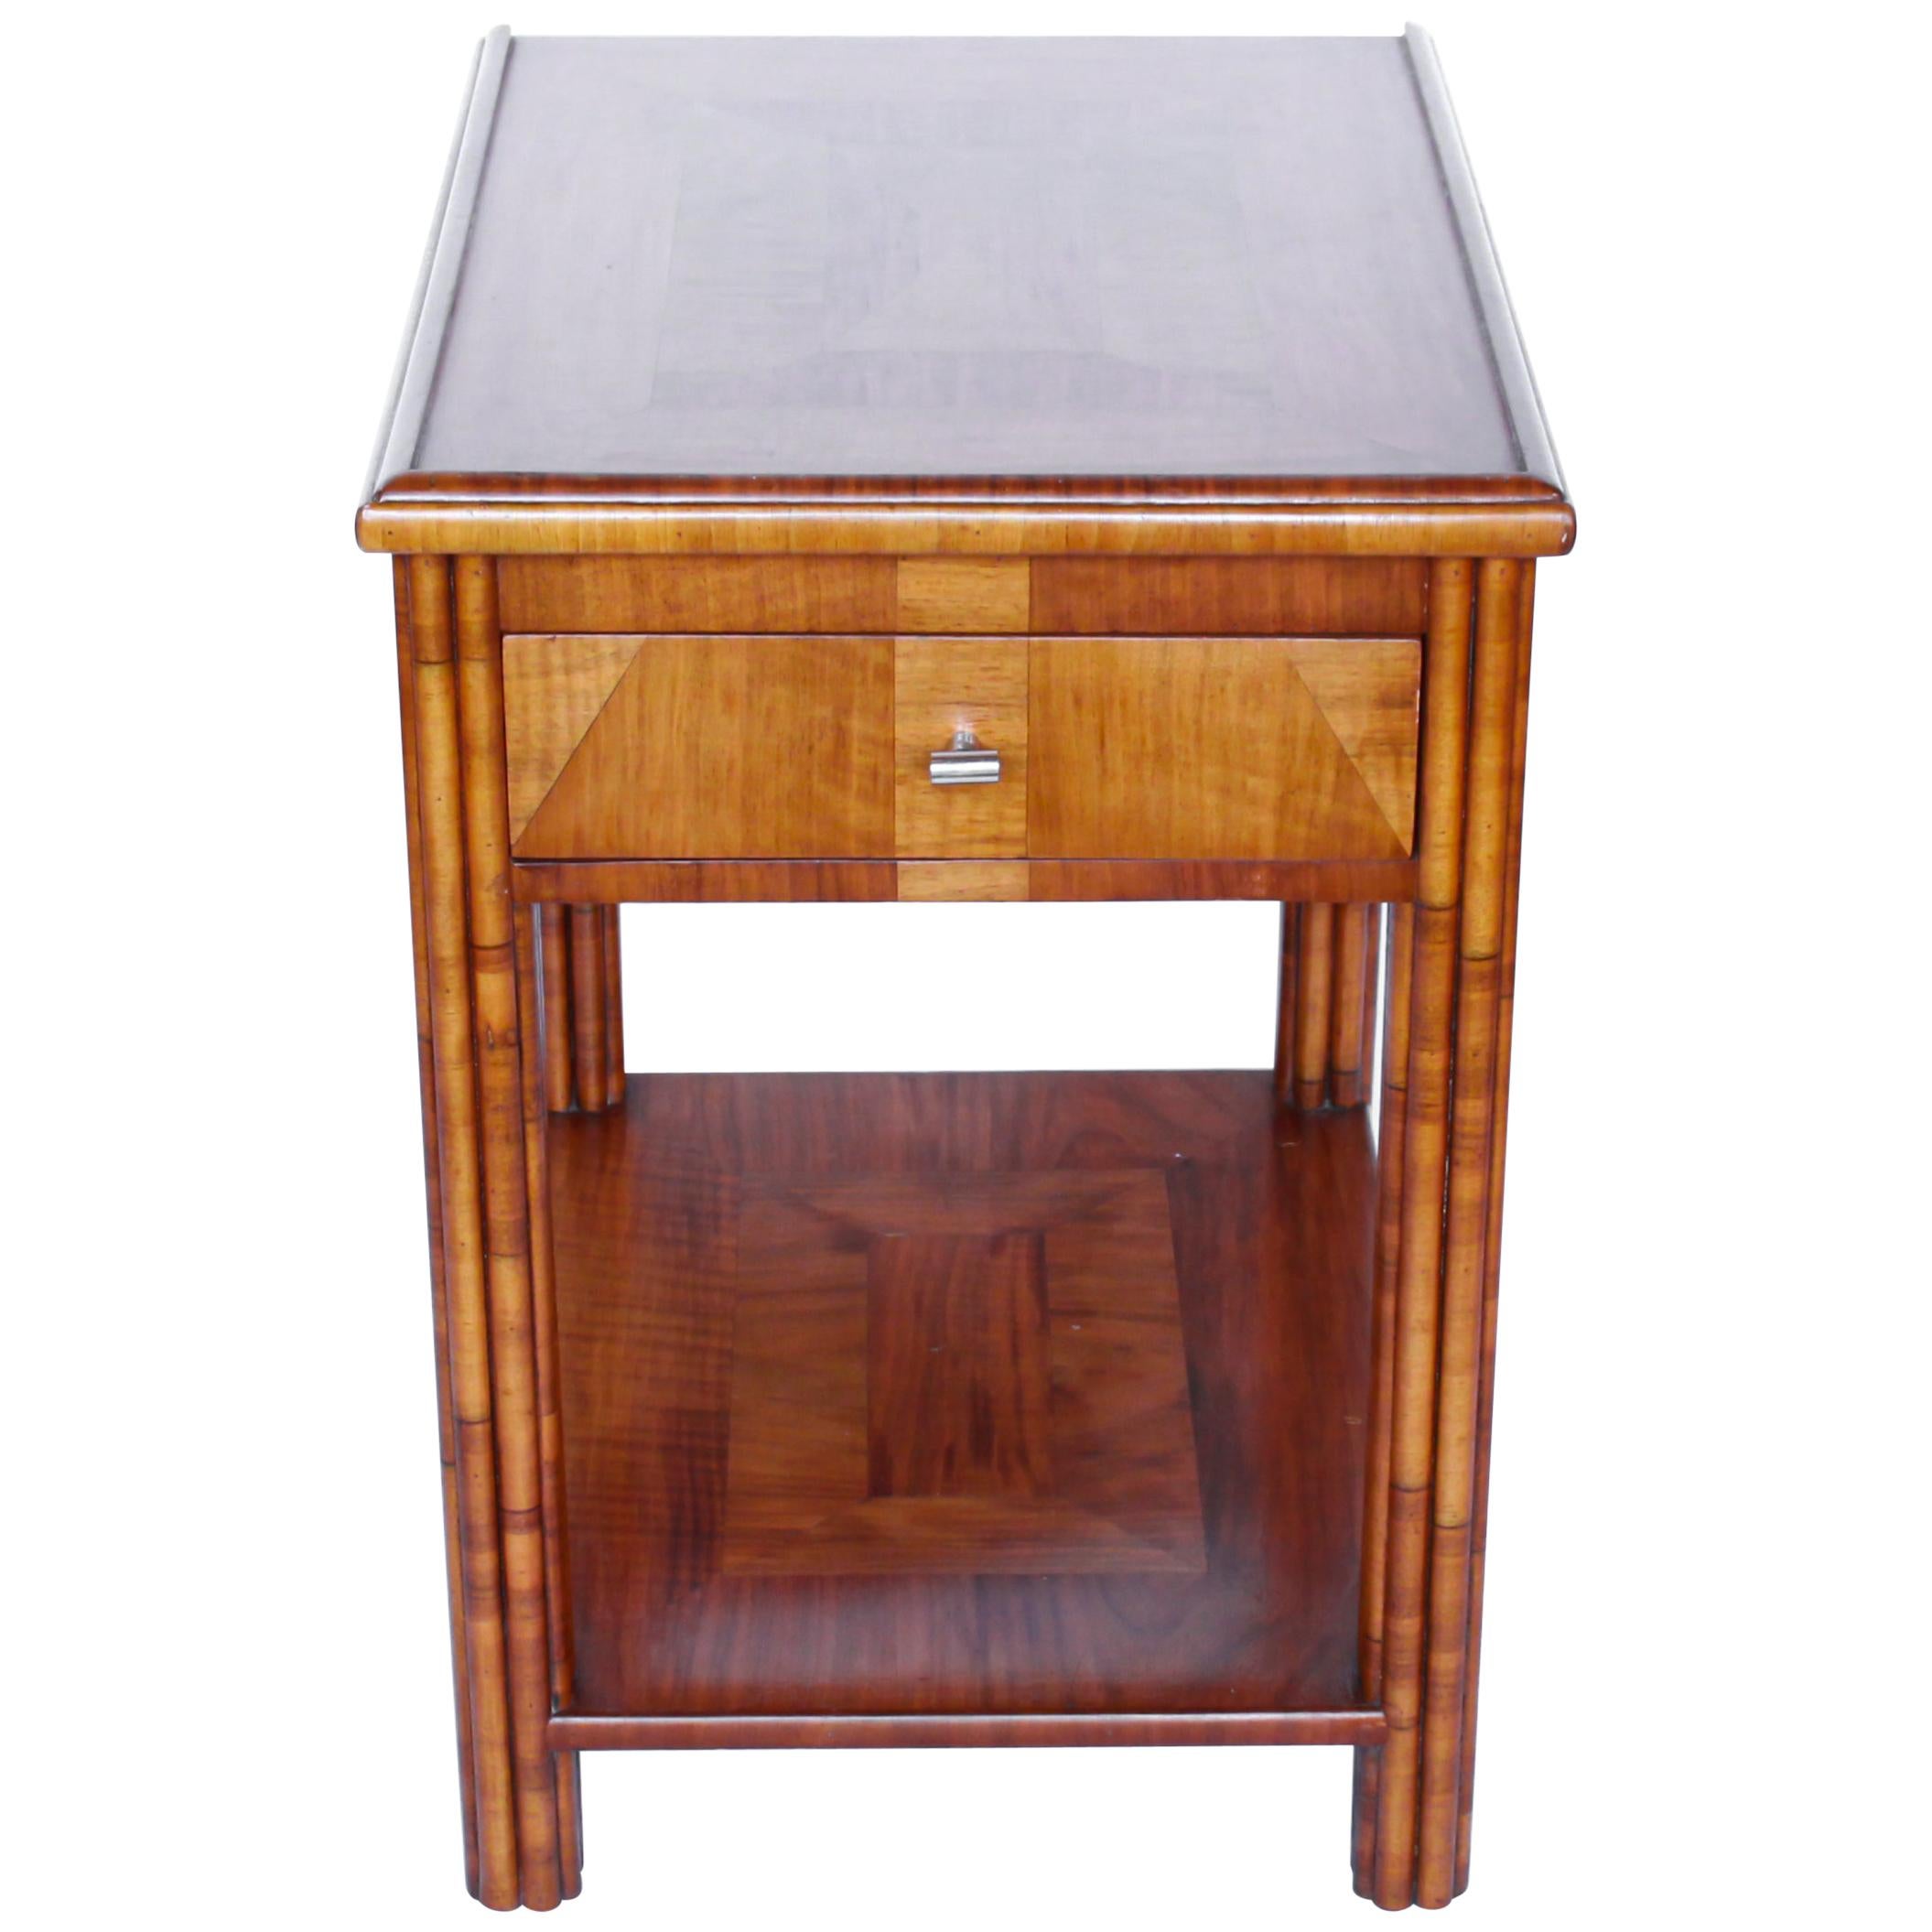 Art Deco Occasional Table Walnut with Sliding Tray and Integral Drawer 1930's